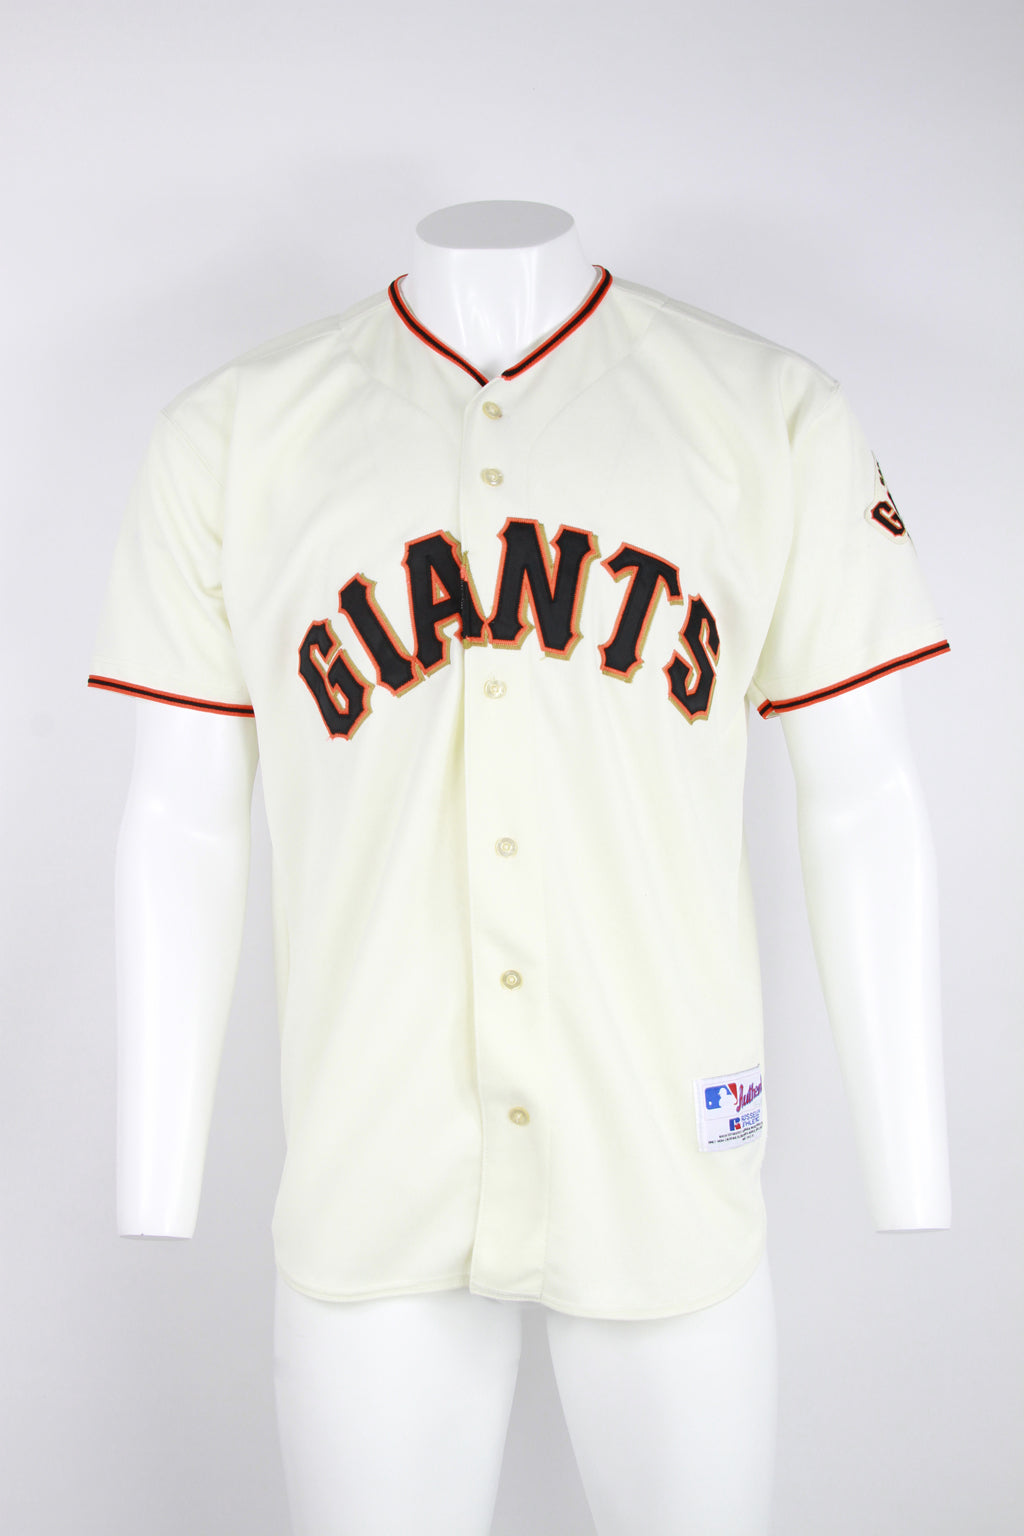 Authentic Russell San Francisco Giants Jersey Cream stitched Large Blank  Back